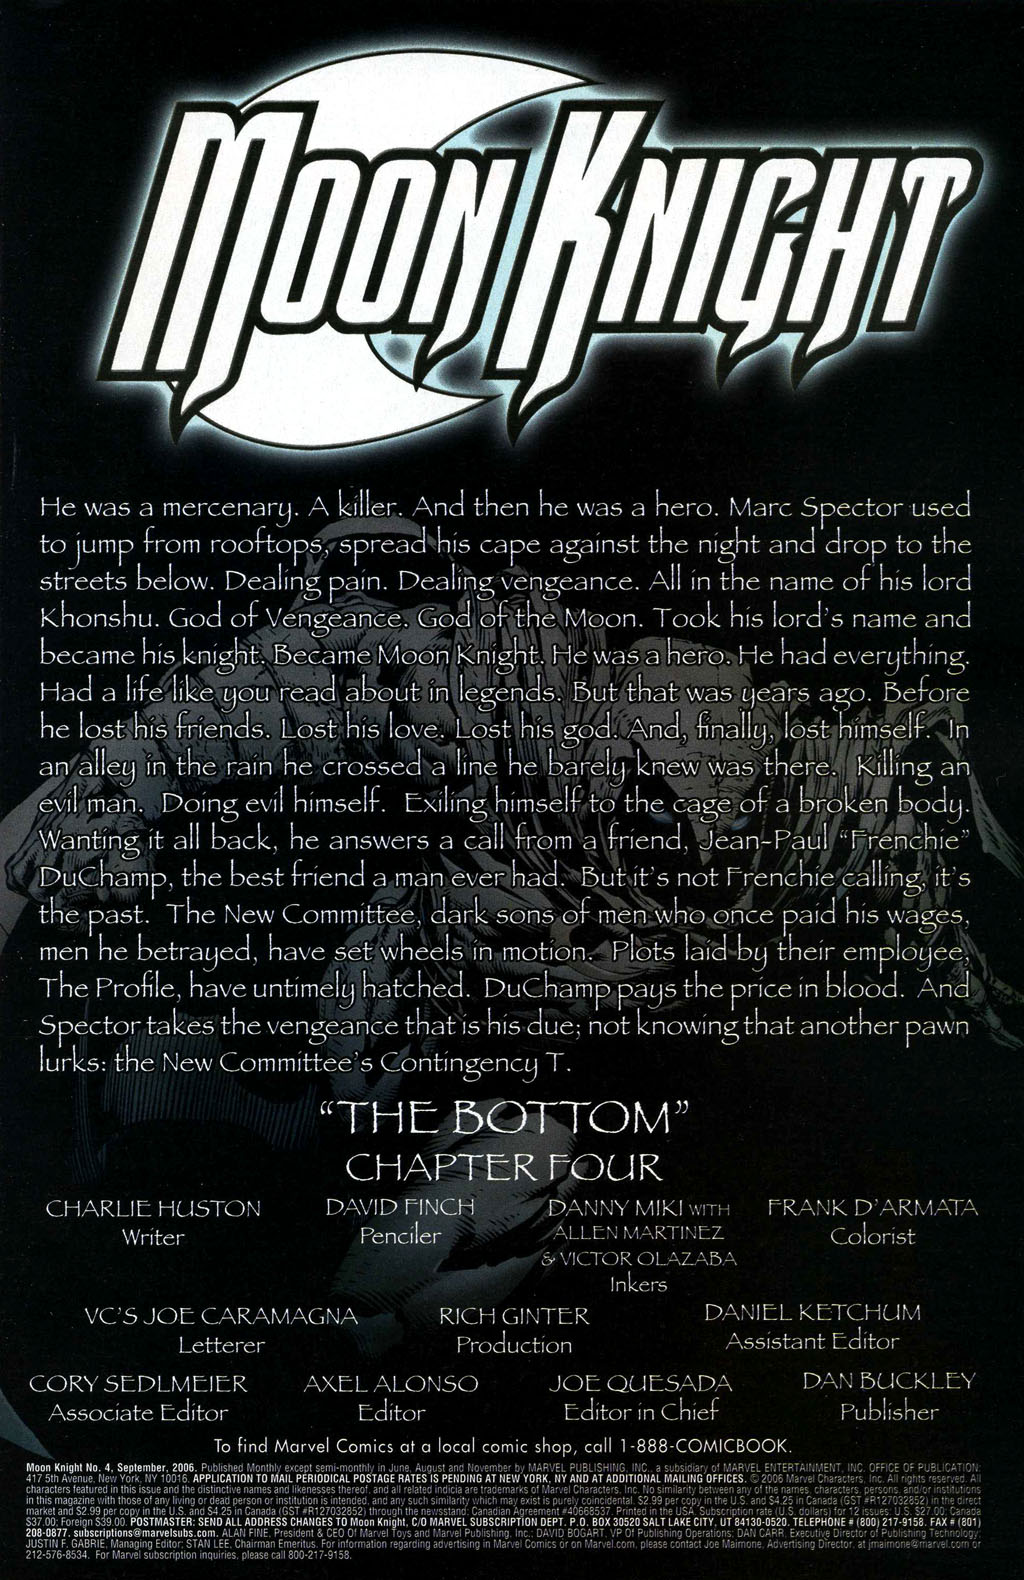  Moon Knight #4 - The Bottom Chapter 4: Interest In A Mirror